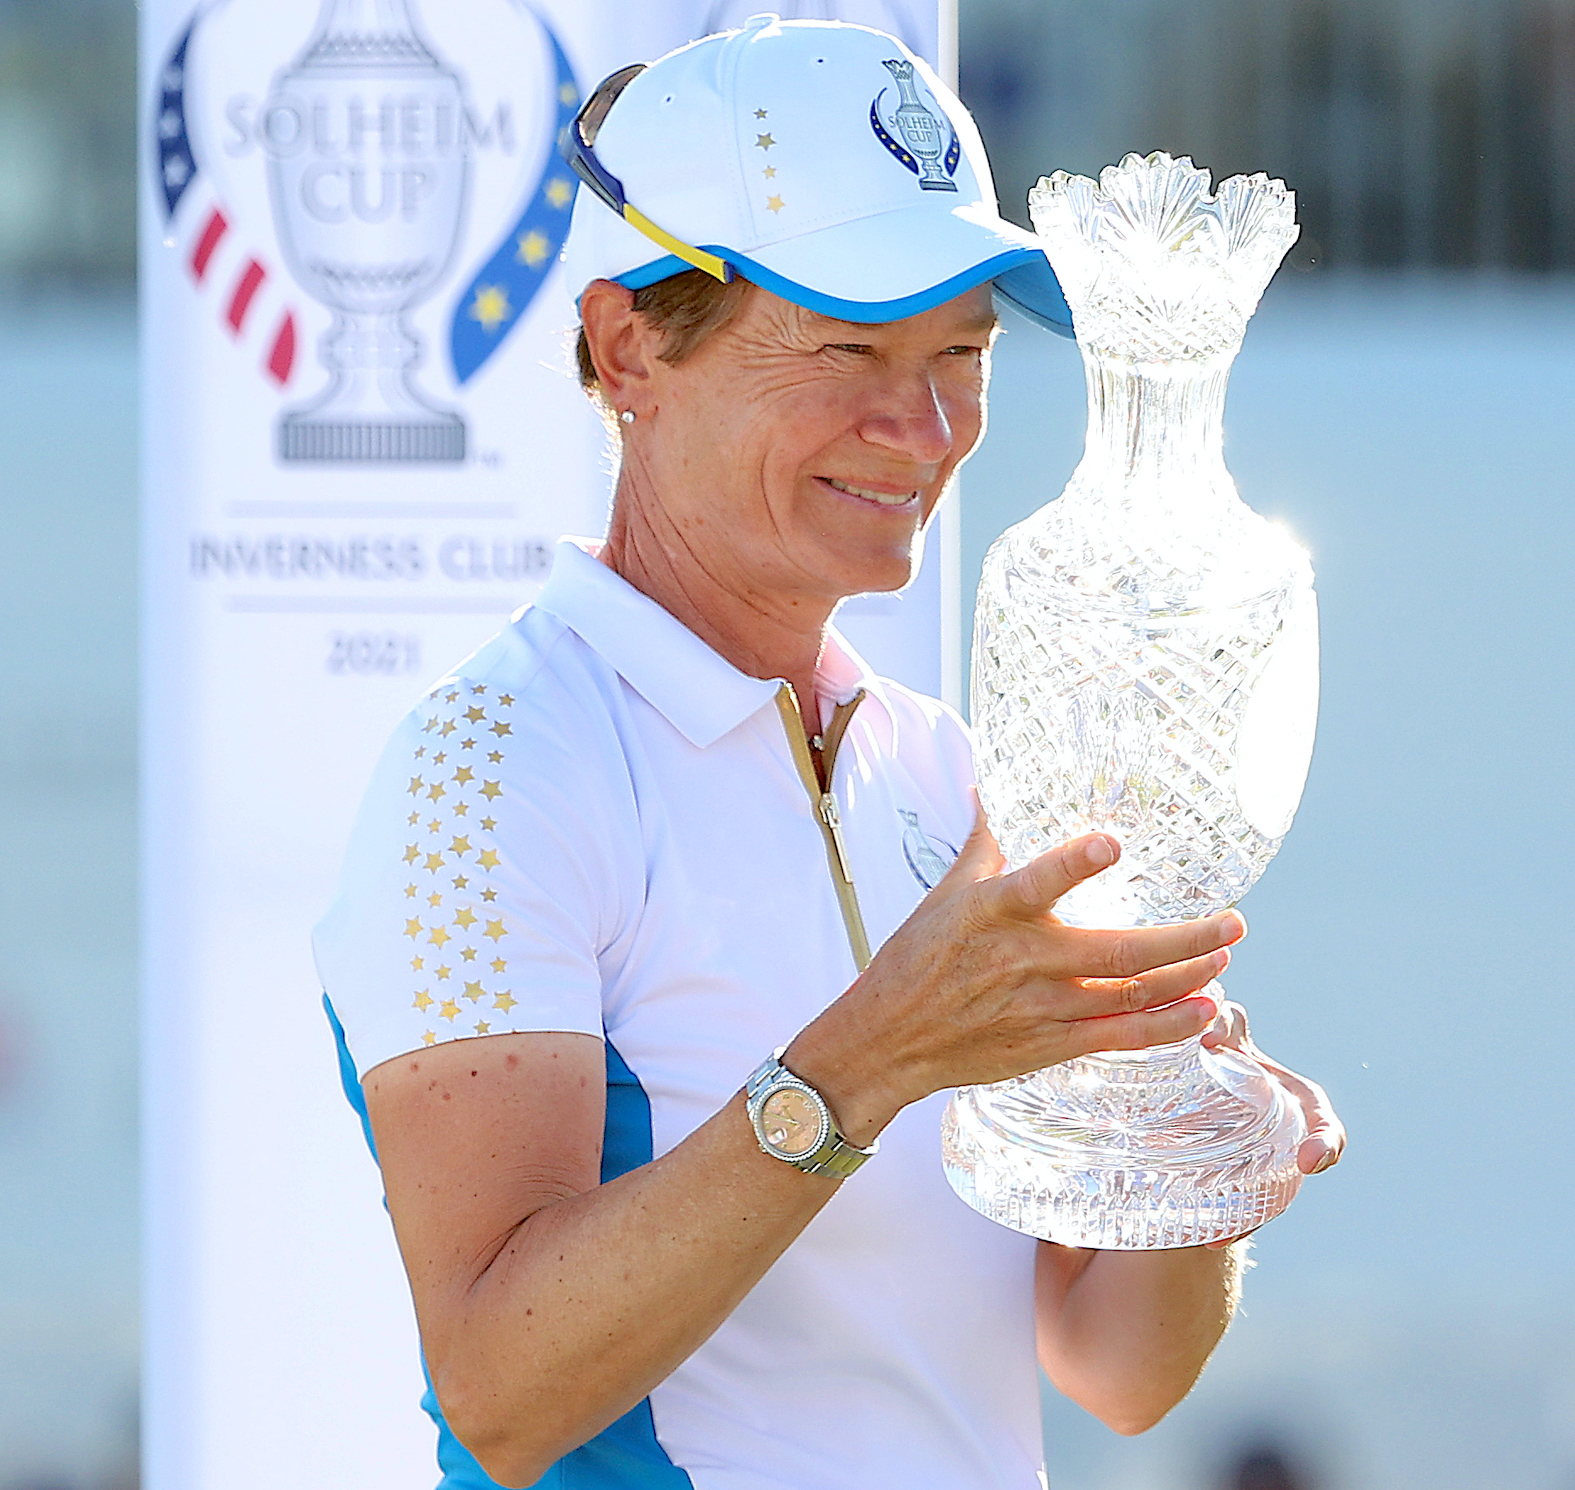 Team Europe Captain Catriona Matthew poses with the Solheim Cup after their win over Team USA at the Inverness Club in 2021